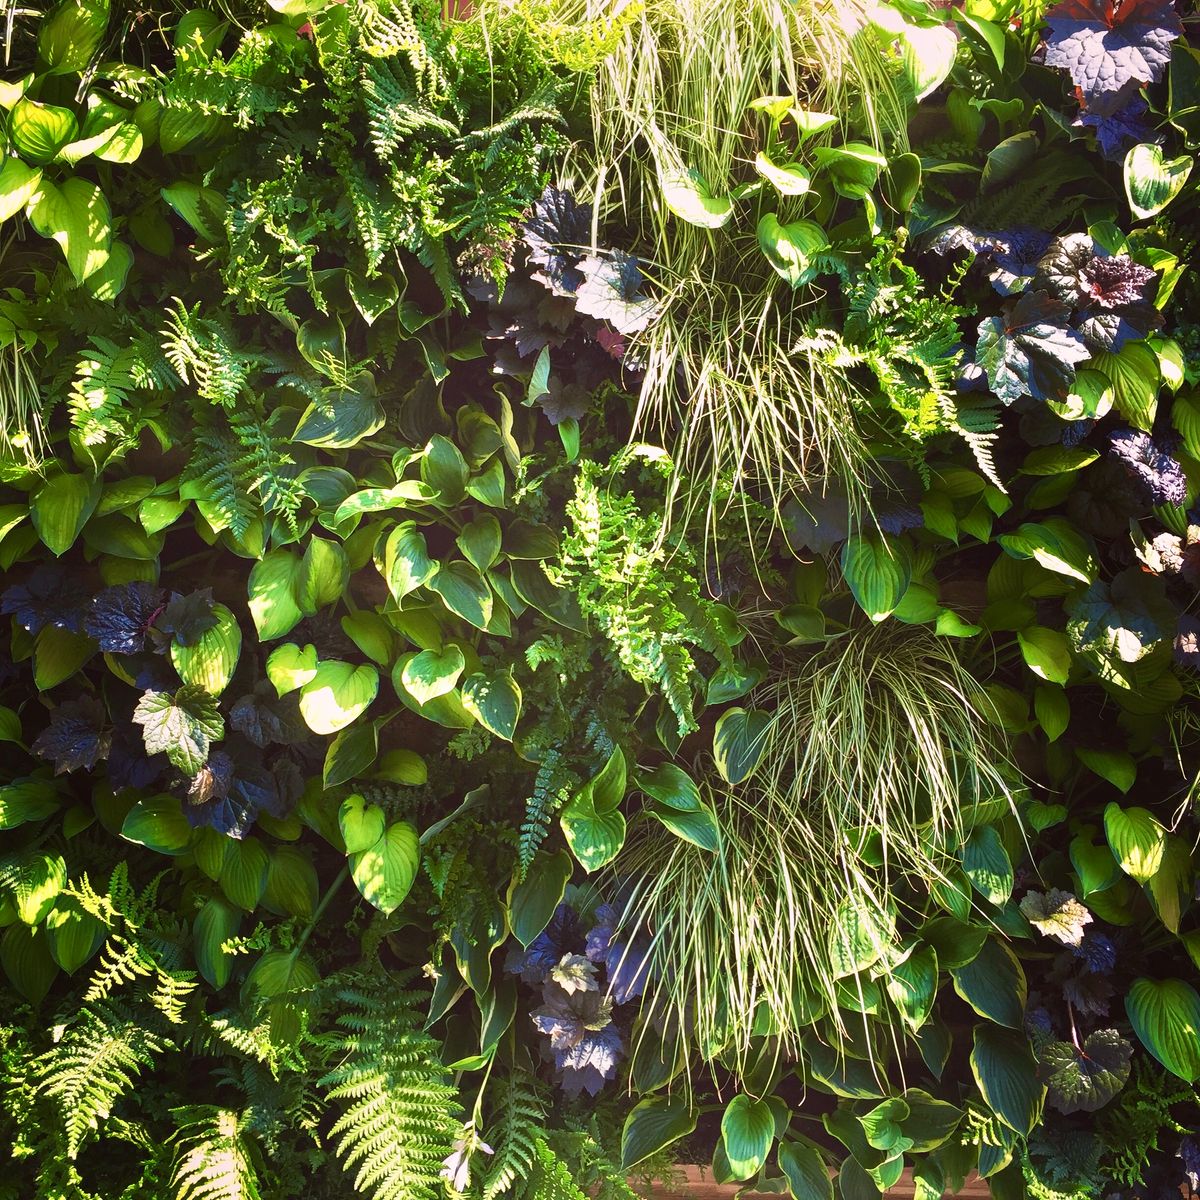 The green wall is a truly luxurious garden design feature which brings a touch of magic to an otherwise difficult to use space